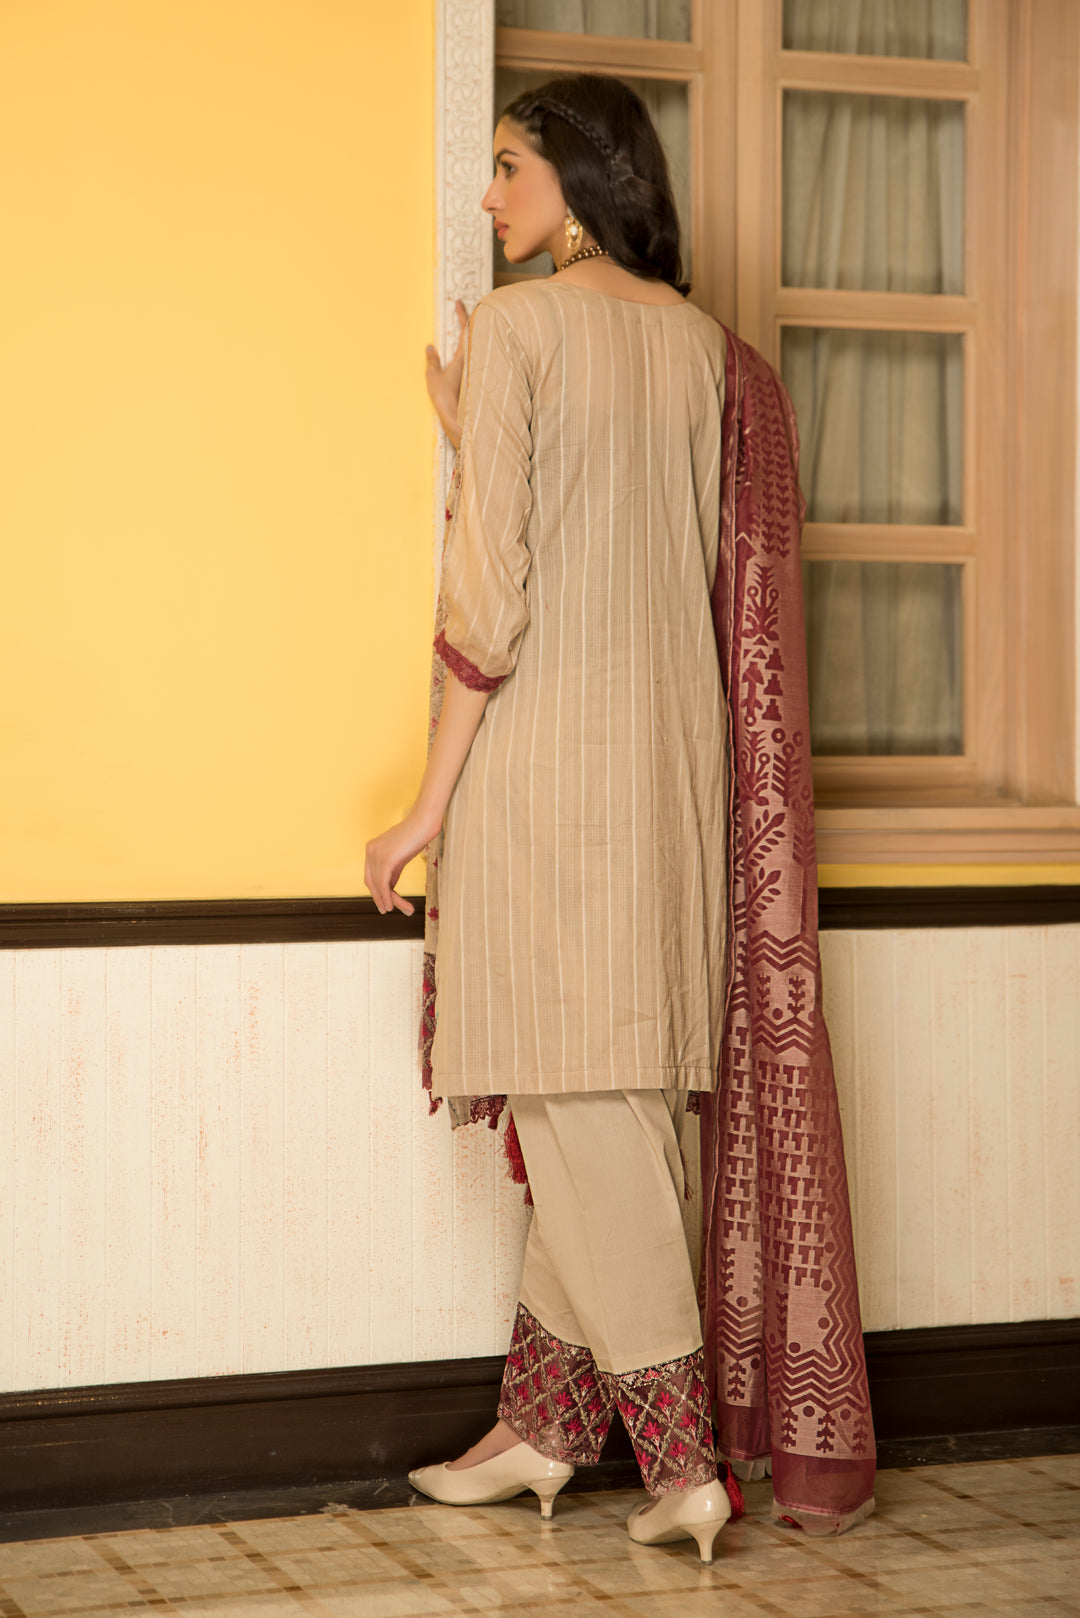  Clothing composed dobby lawn  Jacquard Collection by Jacquard clothing 